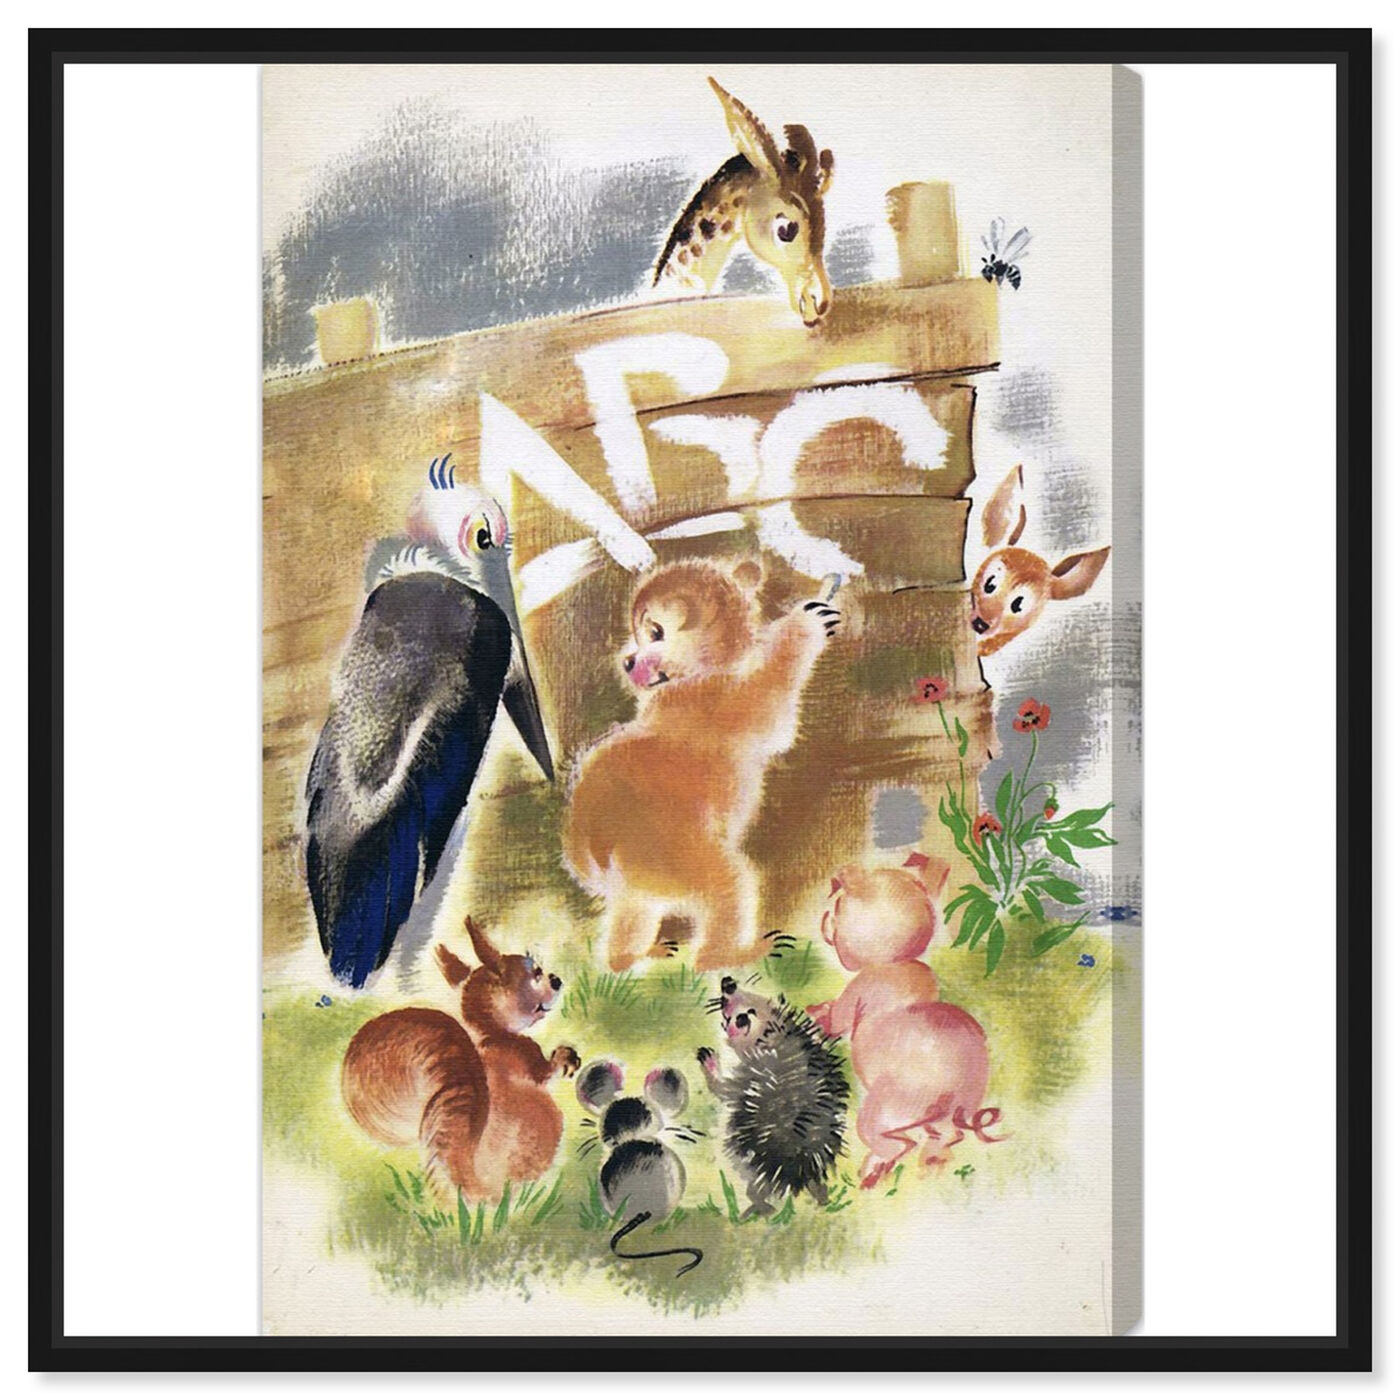 Front view of Animal ABC featuring animals and baby animals art.